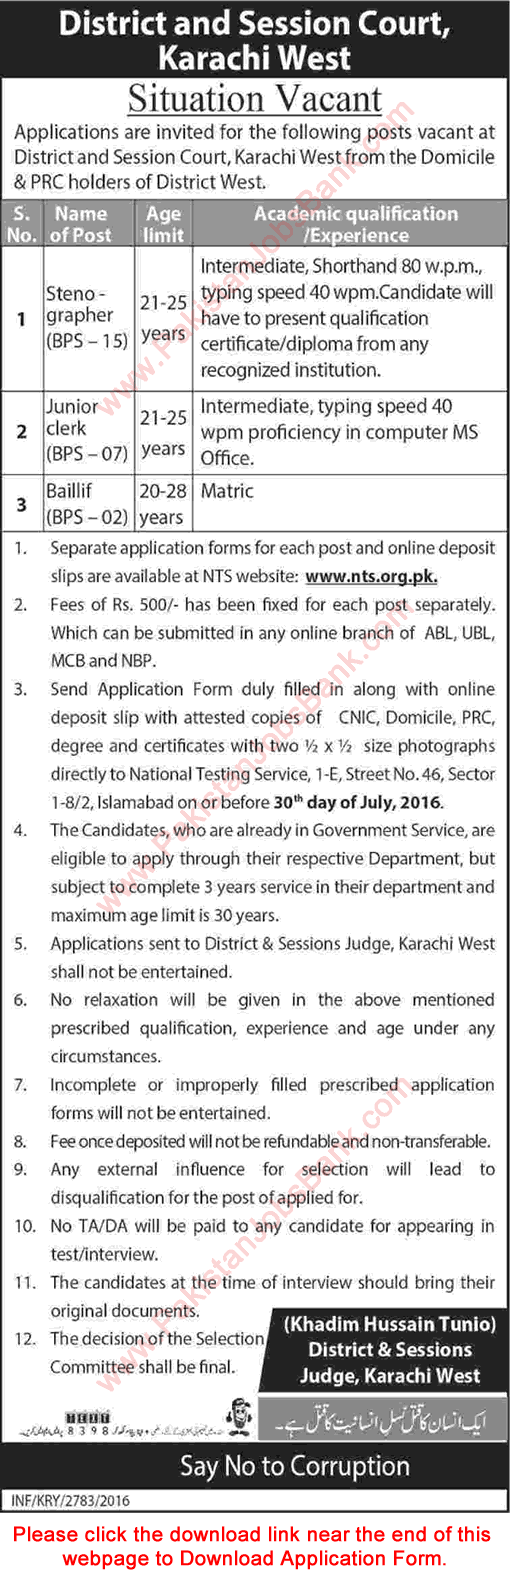 District and Session Court Karachi West Jobs July 2016 NTS Application Form Stenographer, Clerk & Bailiff Latest